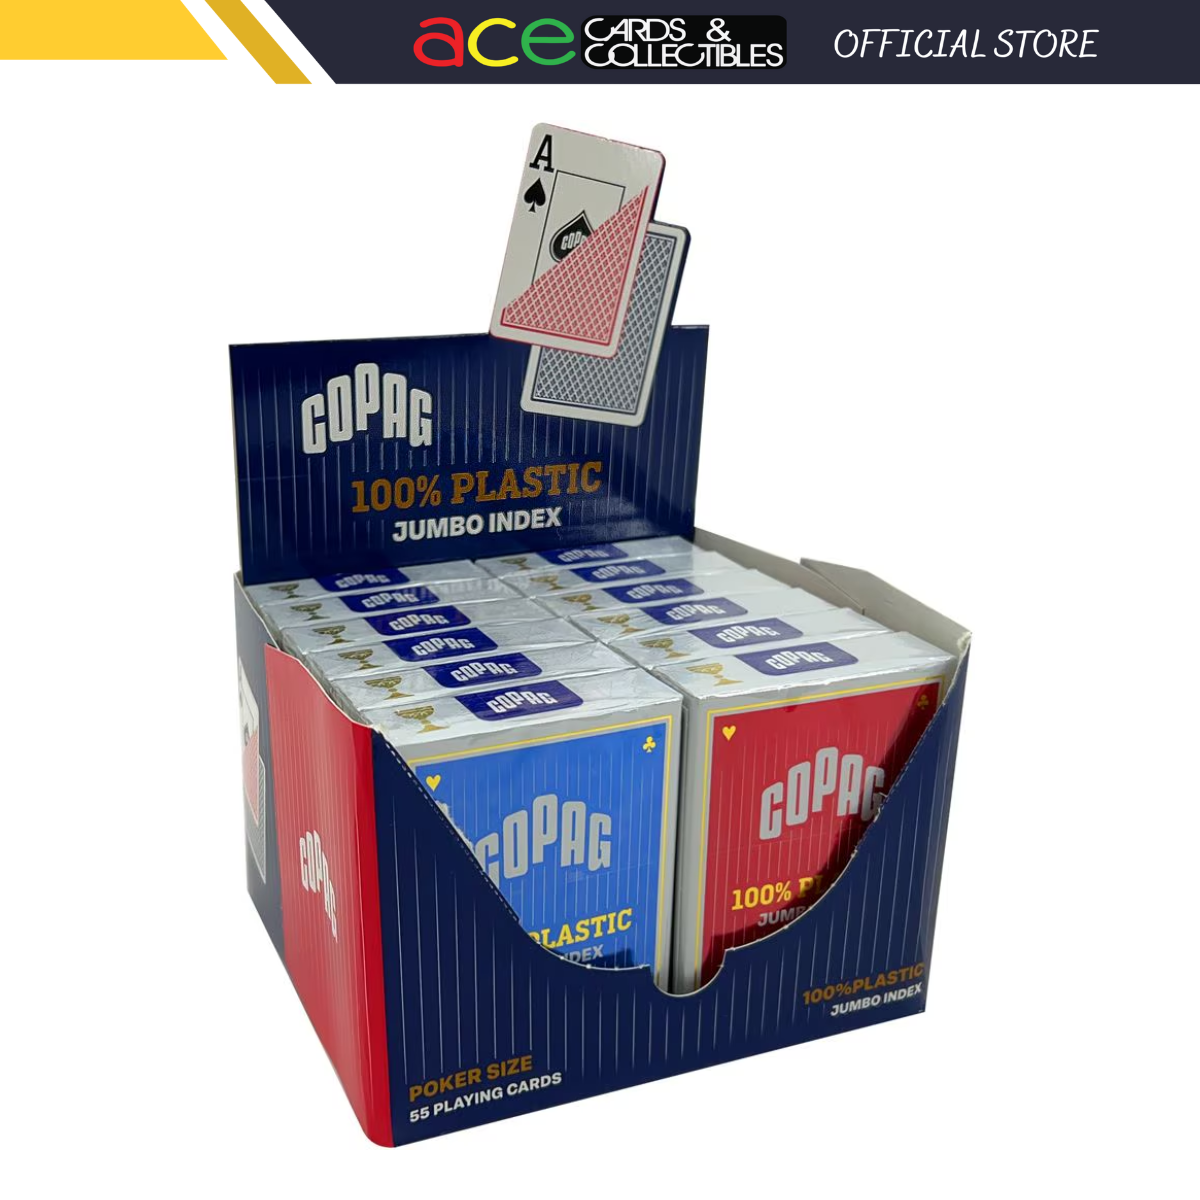 Copag Brick of Playing Cards 2 Jumbo Index-Blue-Copag-Ace Cards & Collectibles